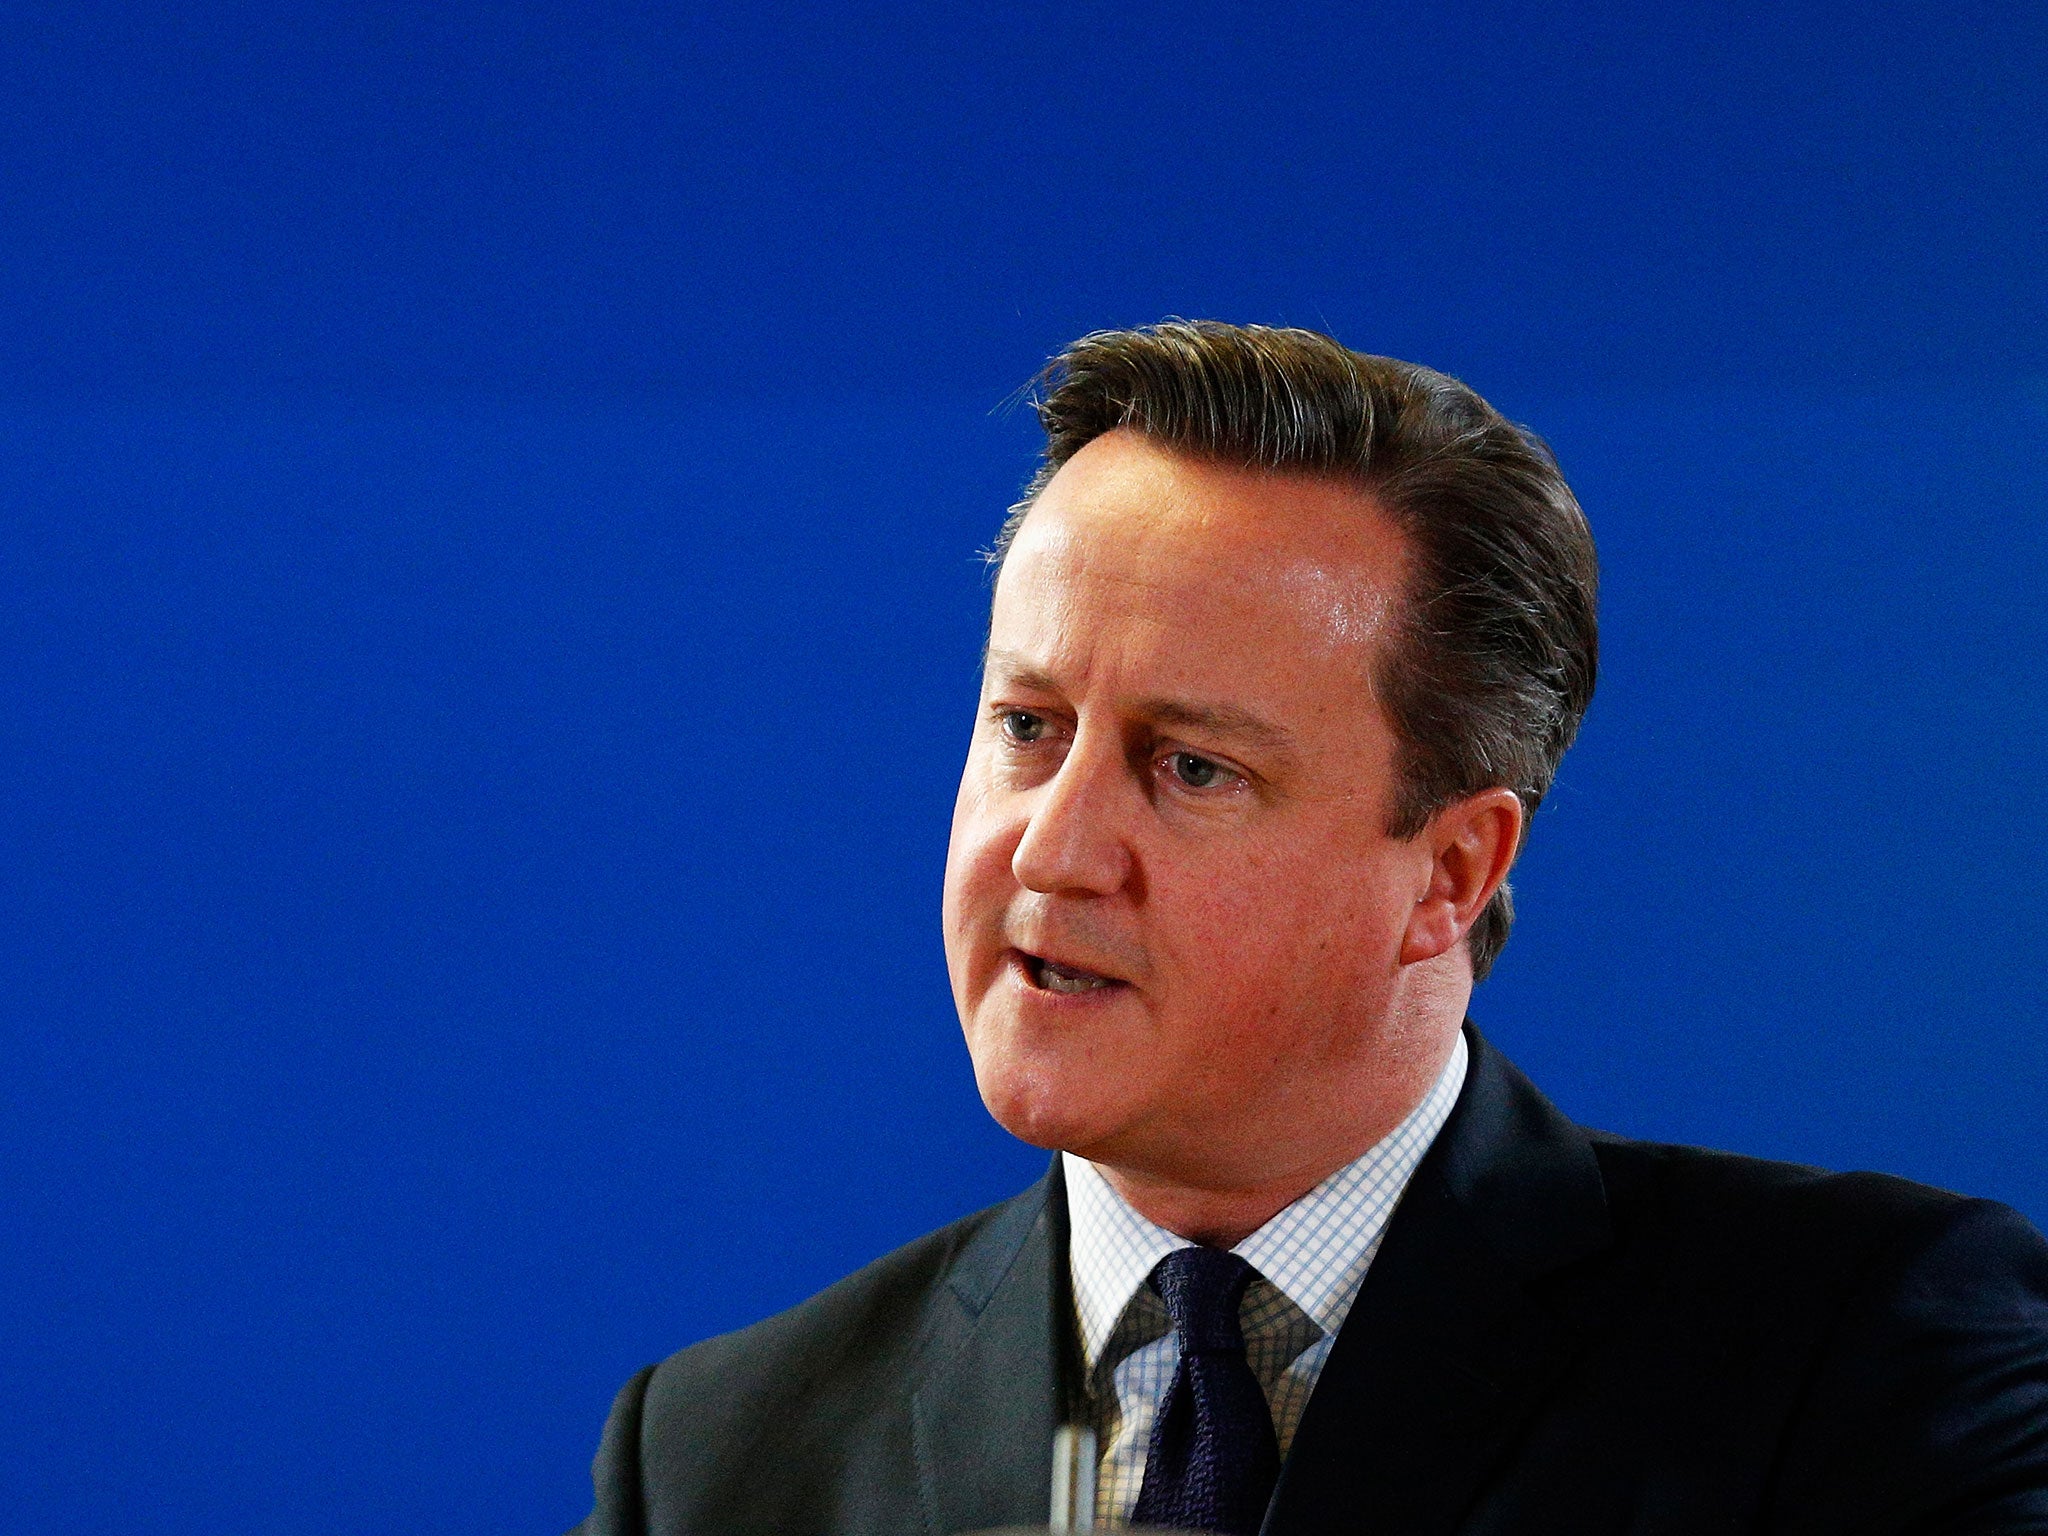 Support for EU membership relied on David Cameron’s negotiating